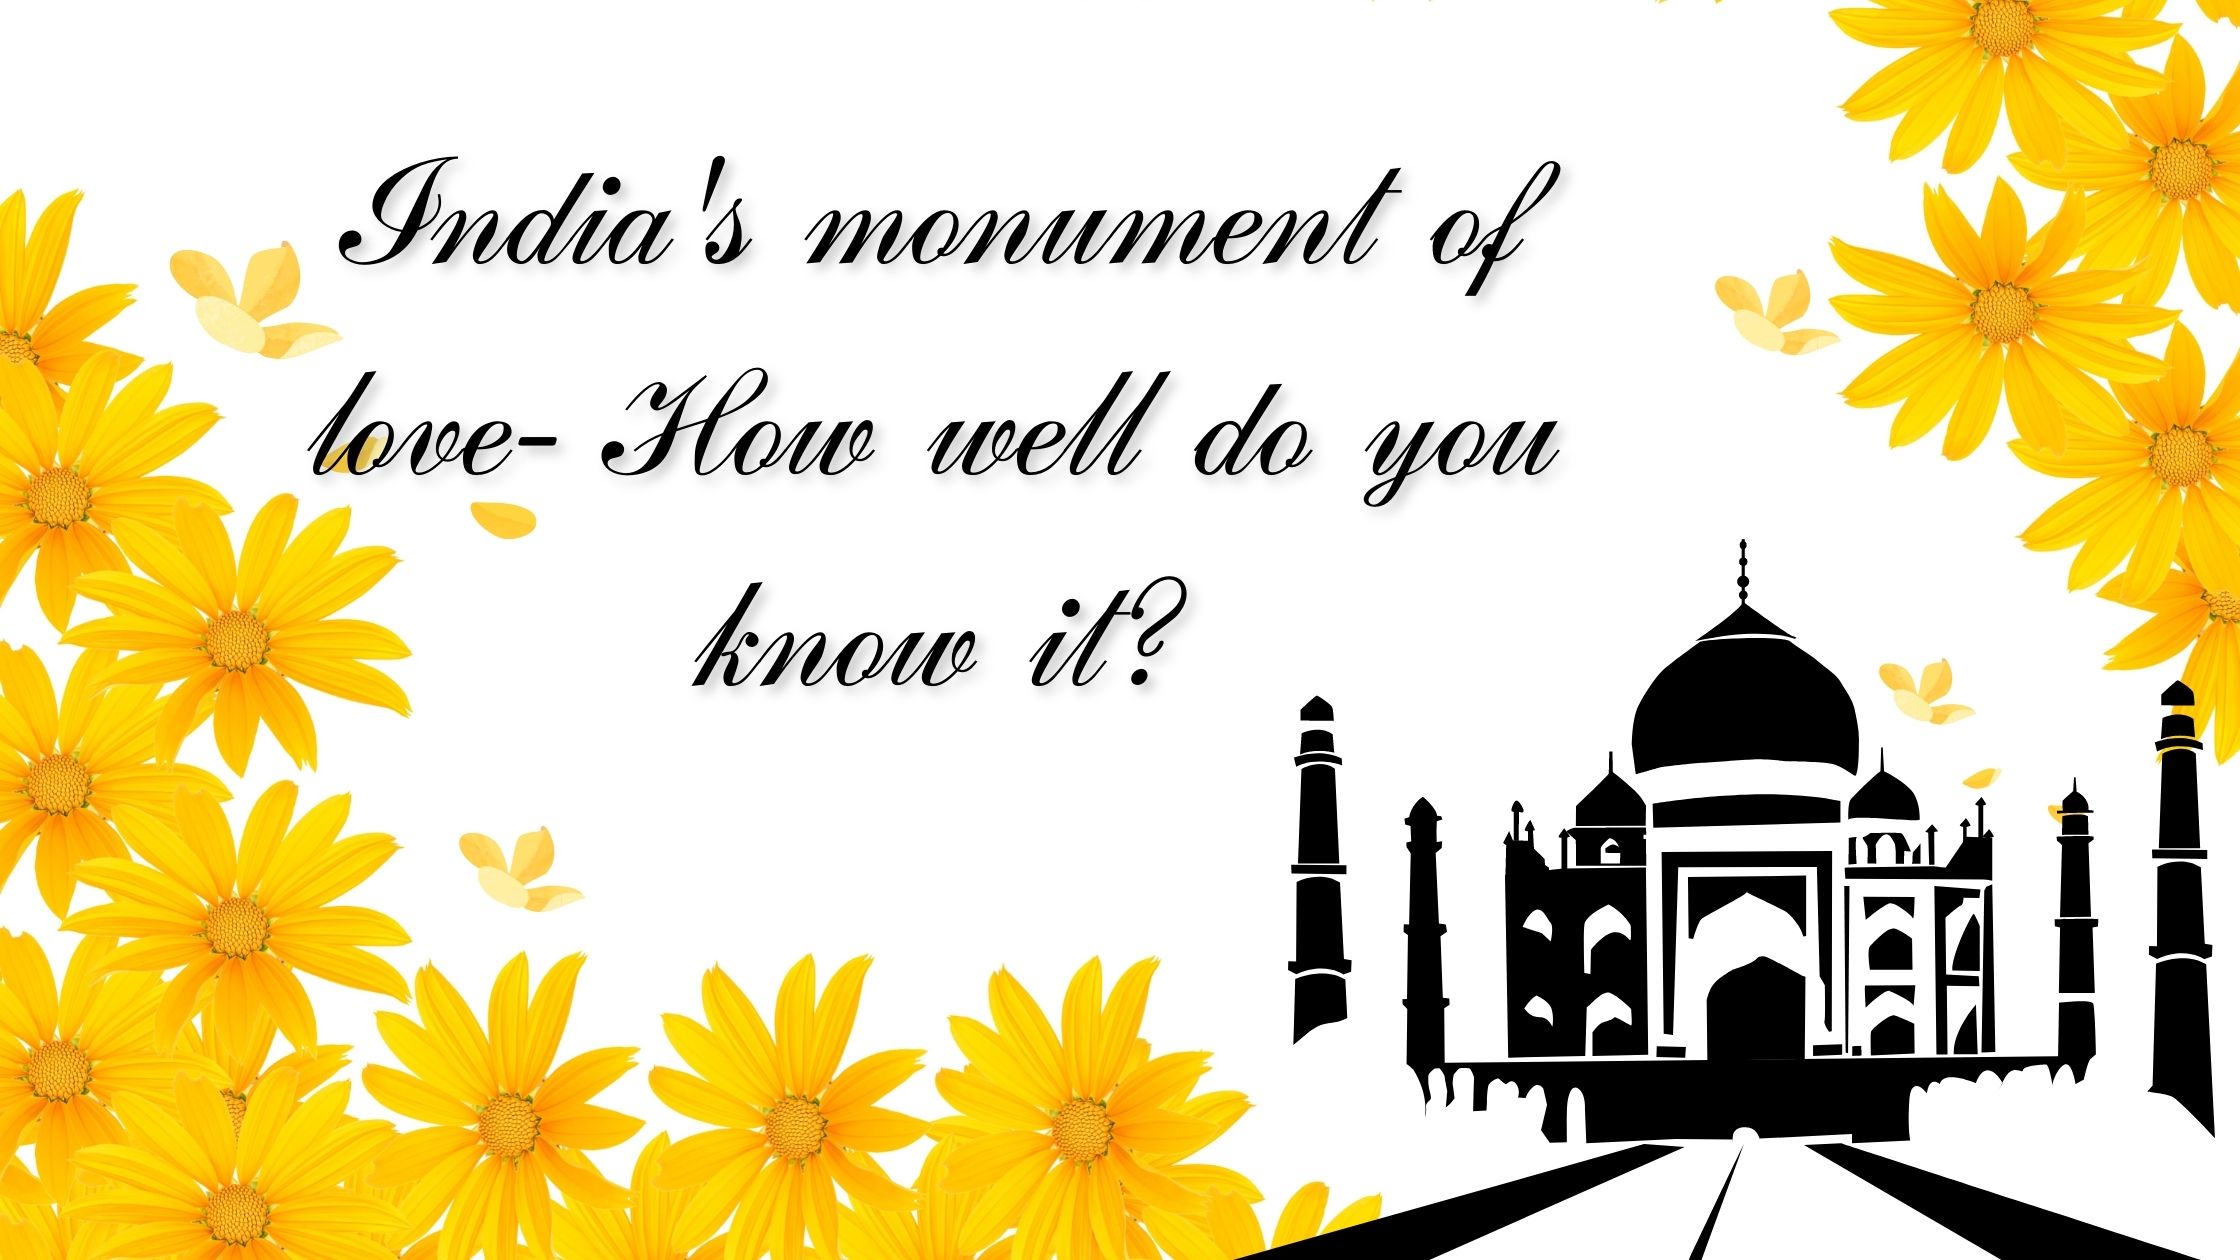 India’s monument of love- How well do you know it?